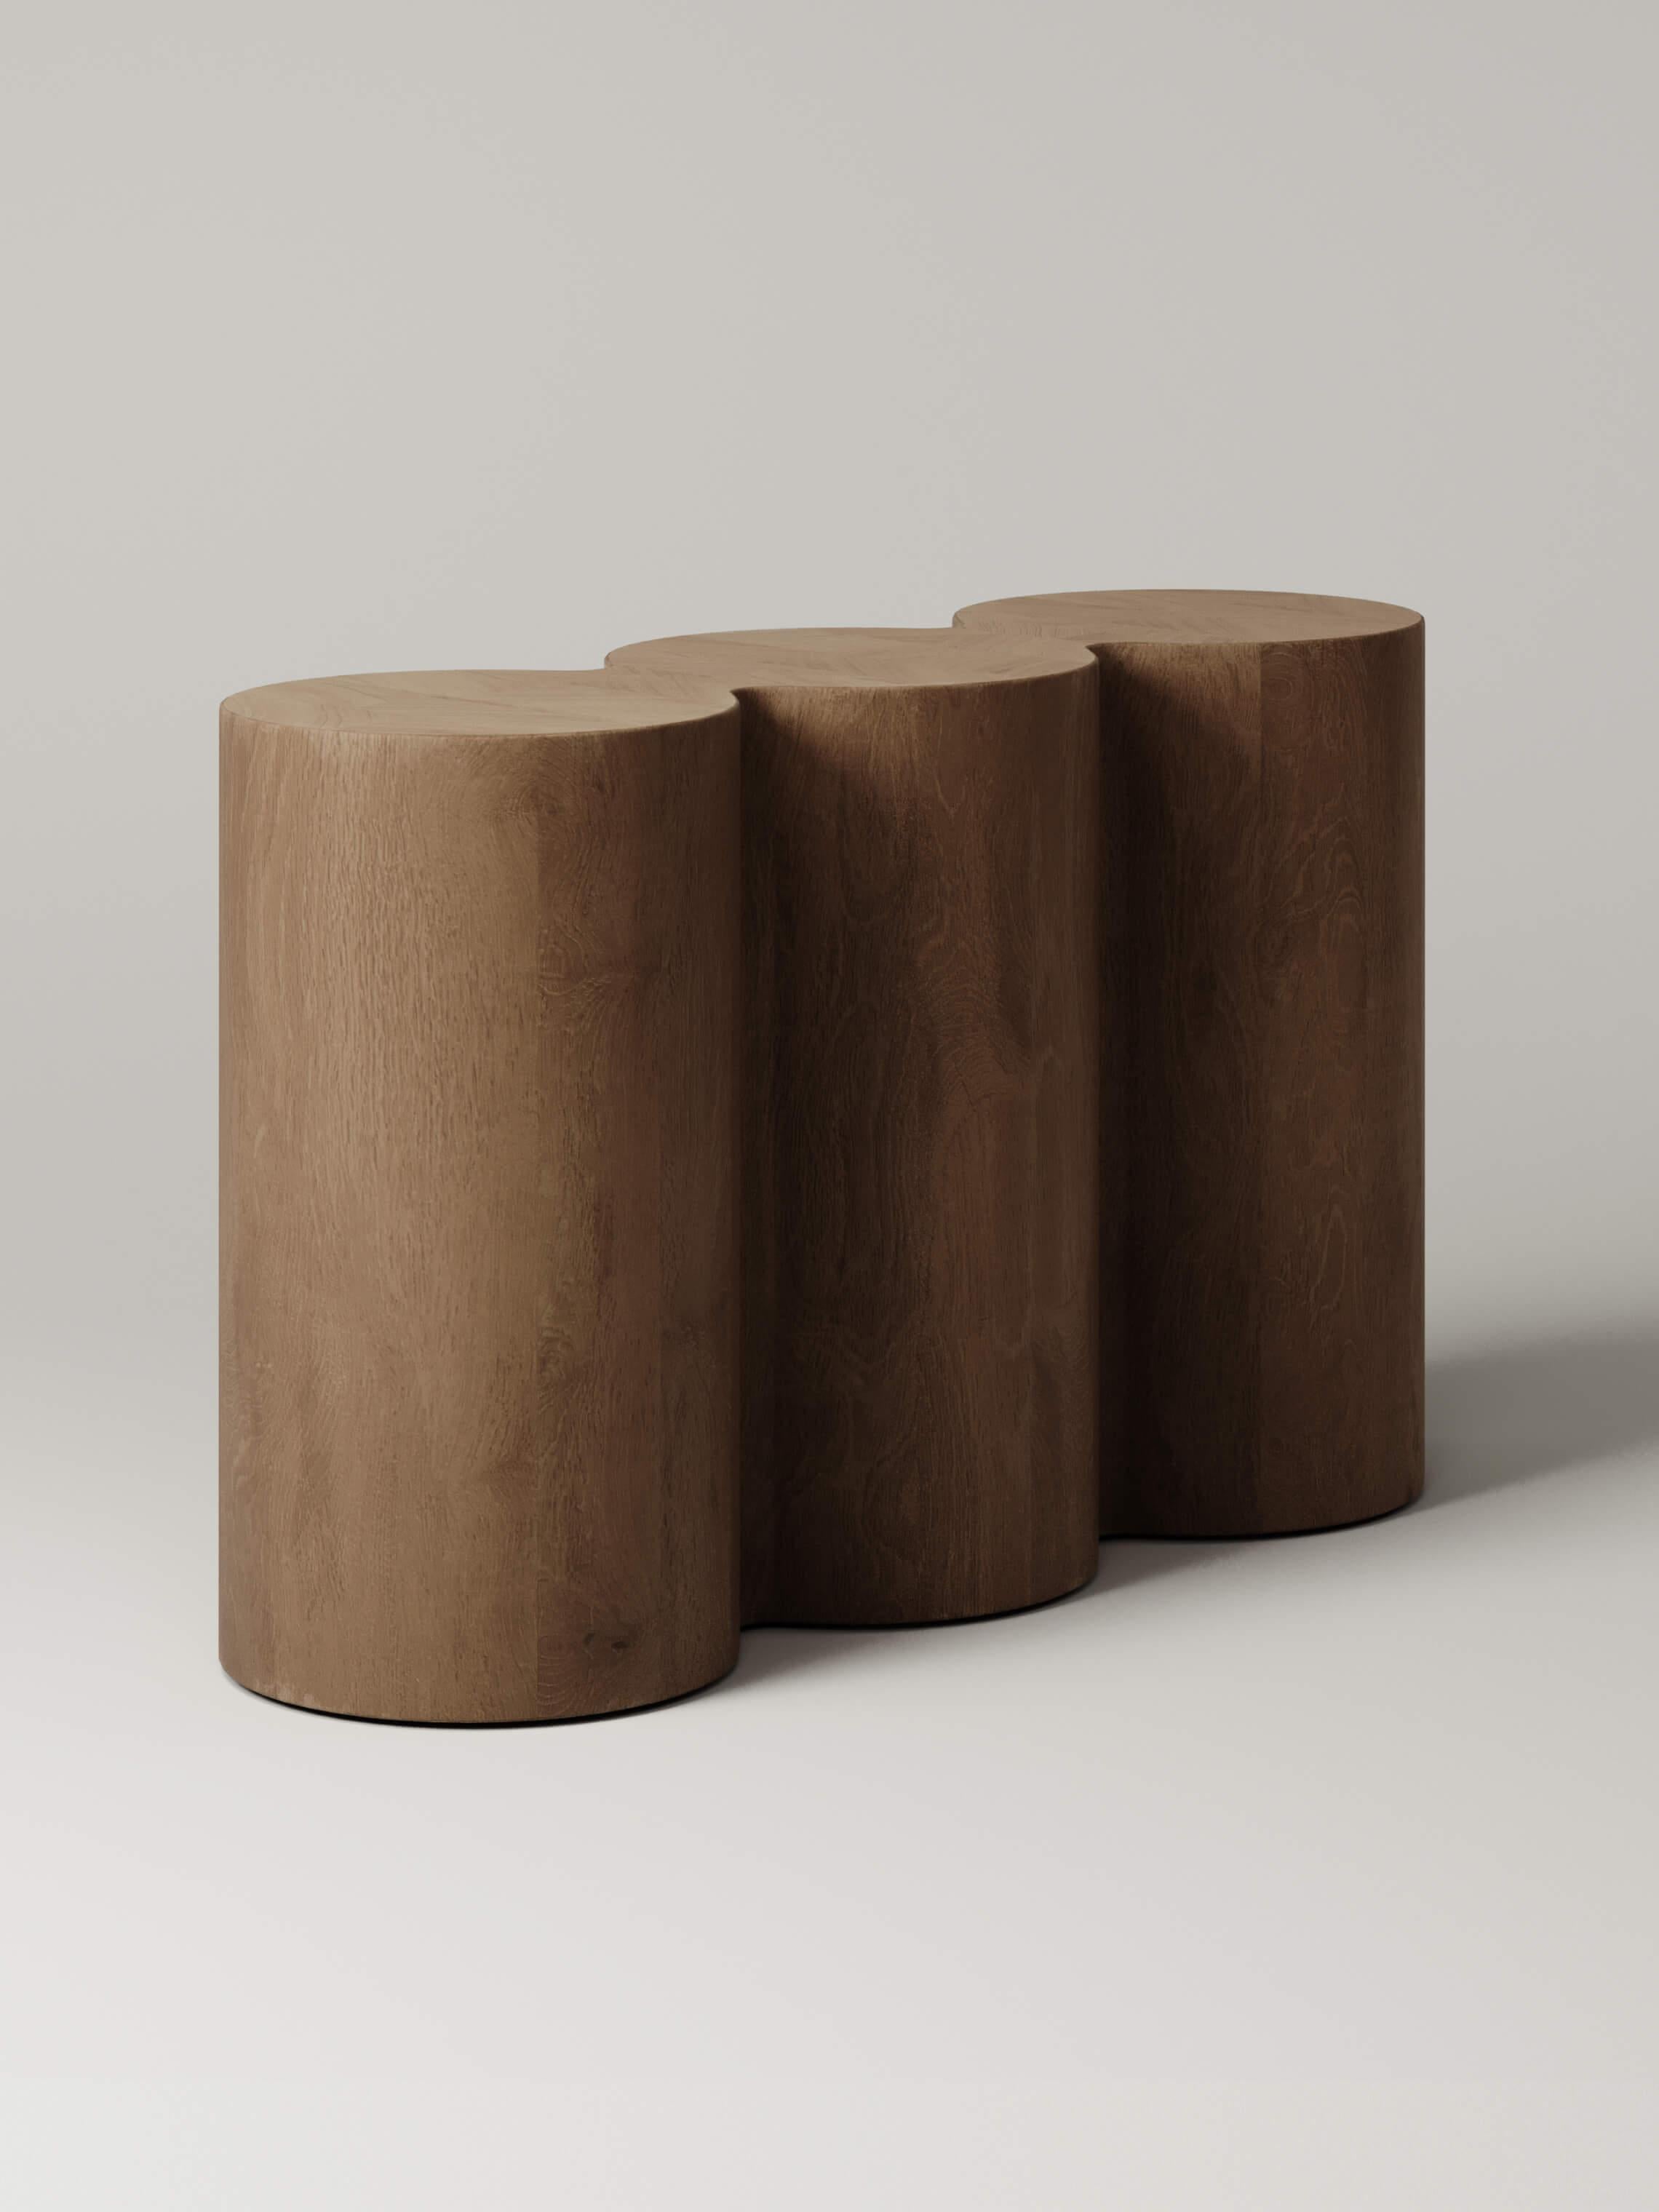 Crafted from oak, the rippled form of the M_008 Console playfully softens the space around it. Part pedestal, part console, it’s sculptural triple column geometry blends the boundaries of utility and form.

Designed by Benni Allan exclusively for